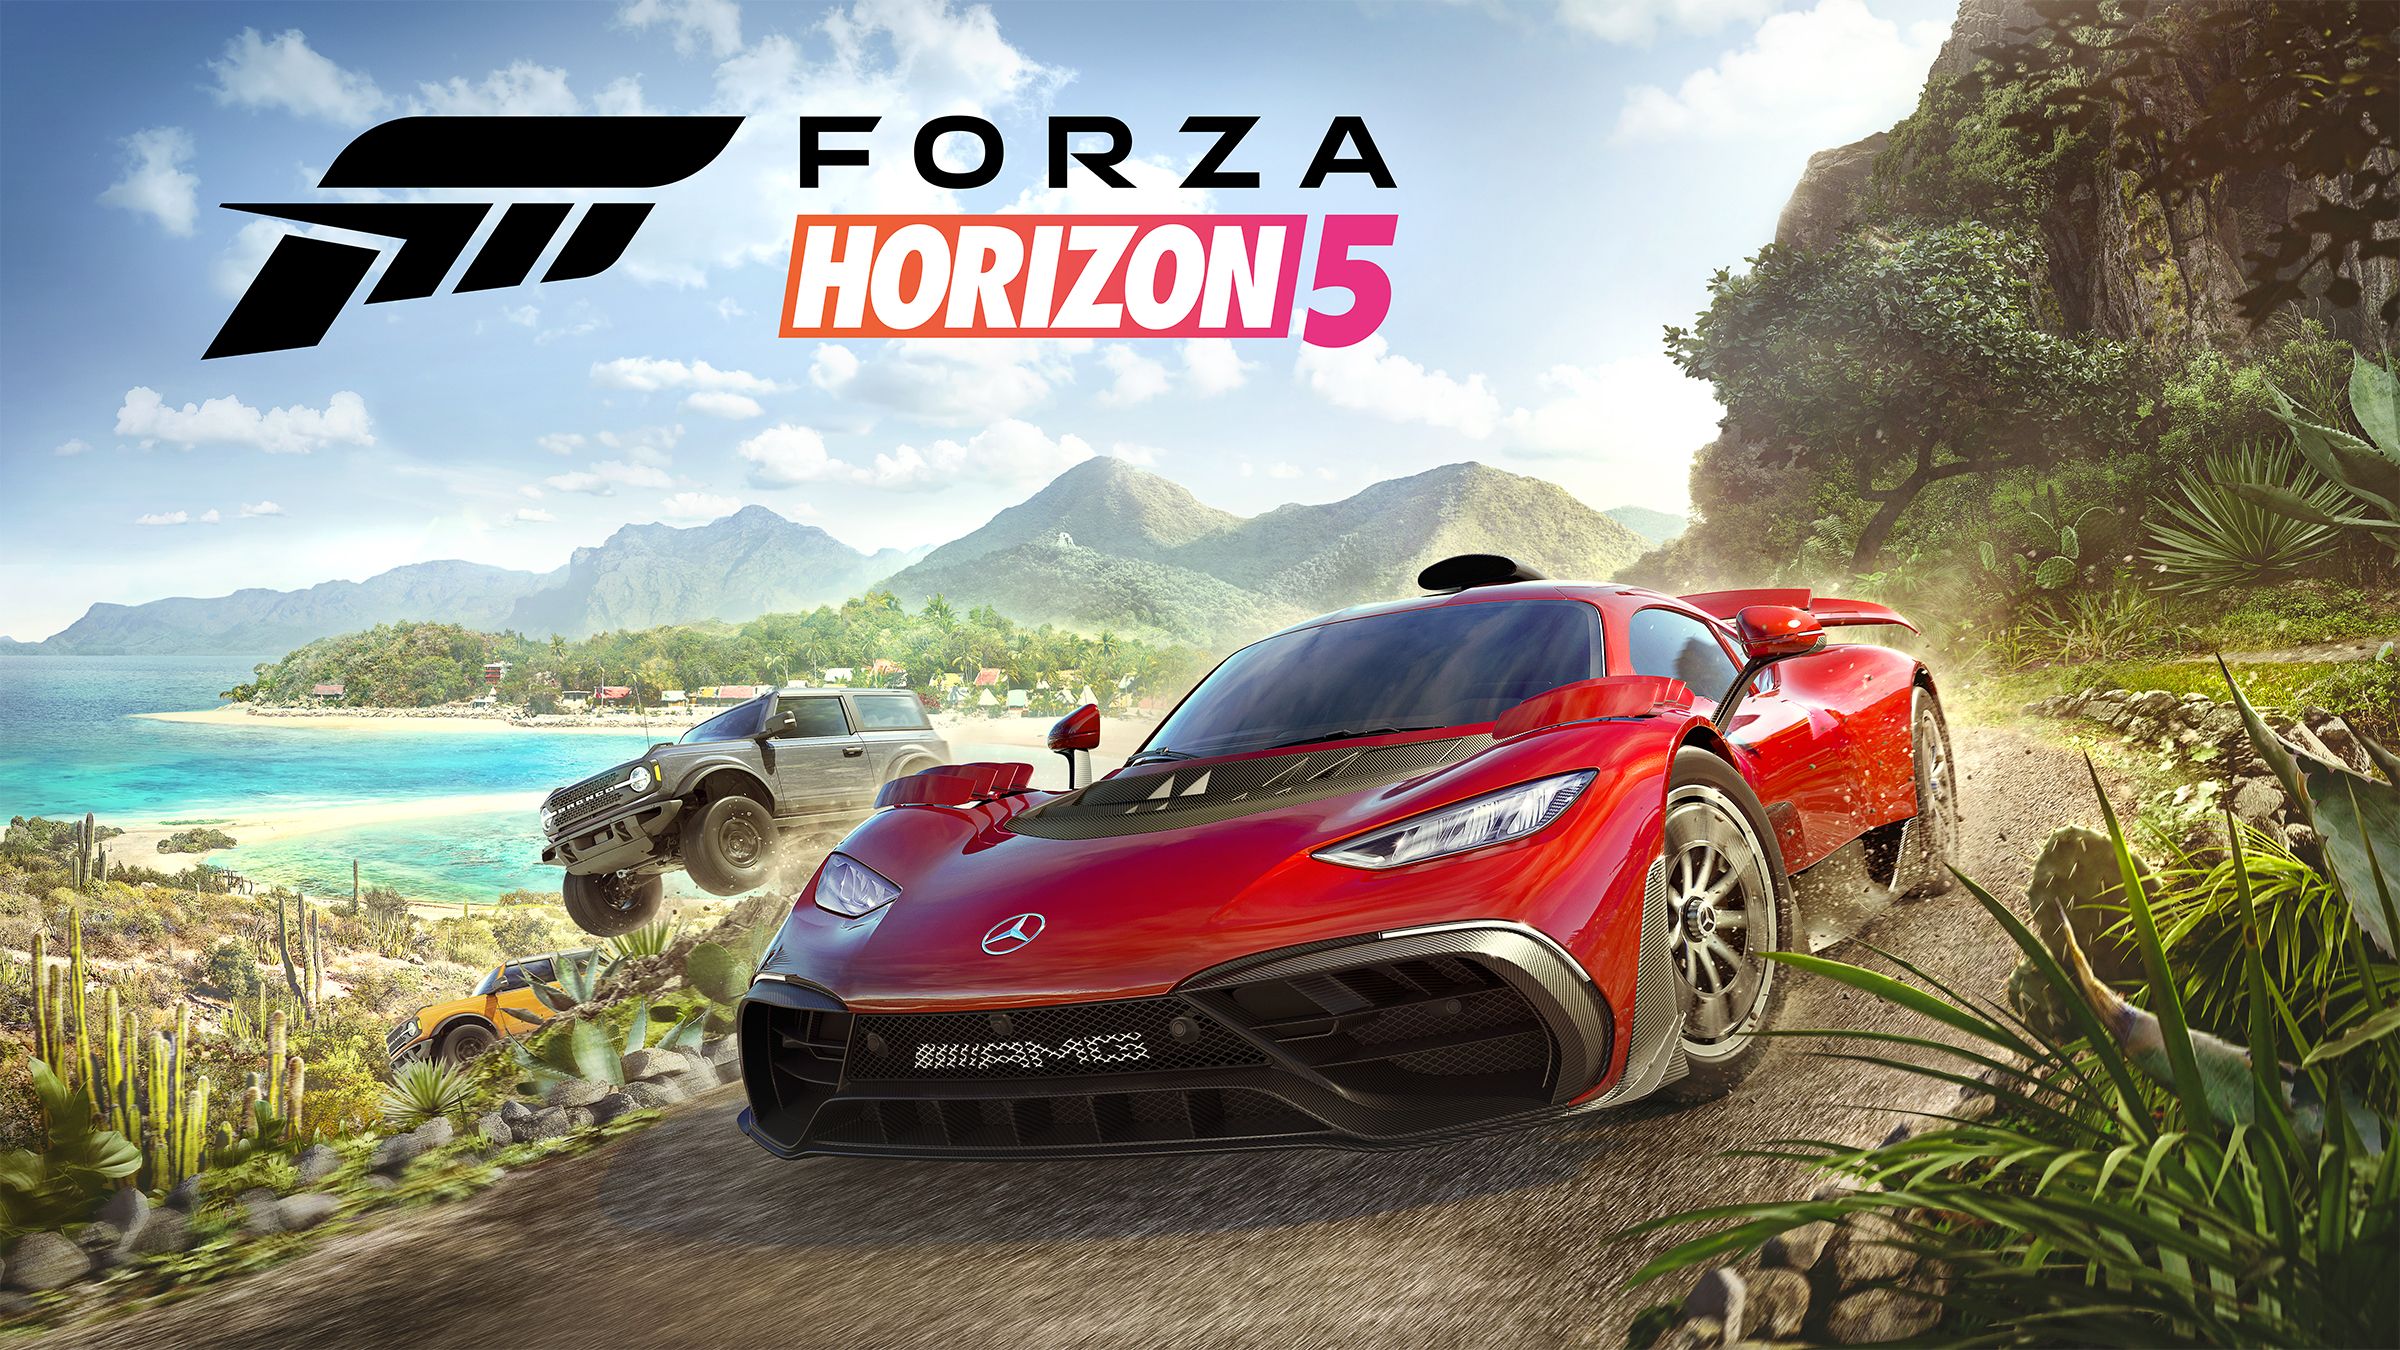 Forza Horizon 3 is now available for free on Windows 10 PC as a demo.  Here's the system requirement details.